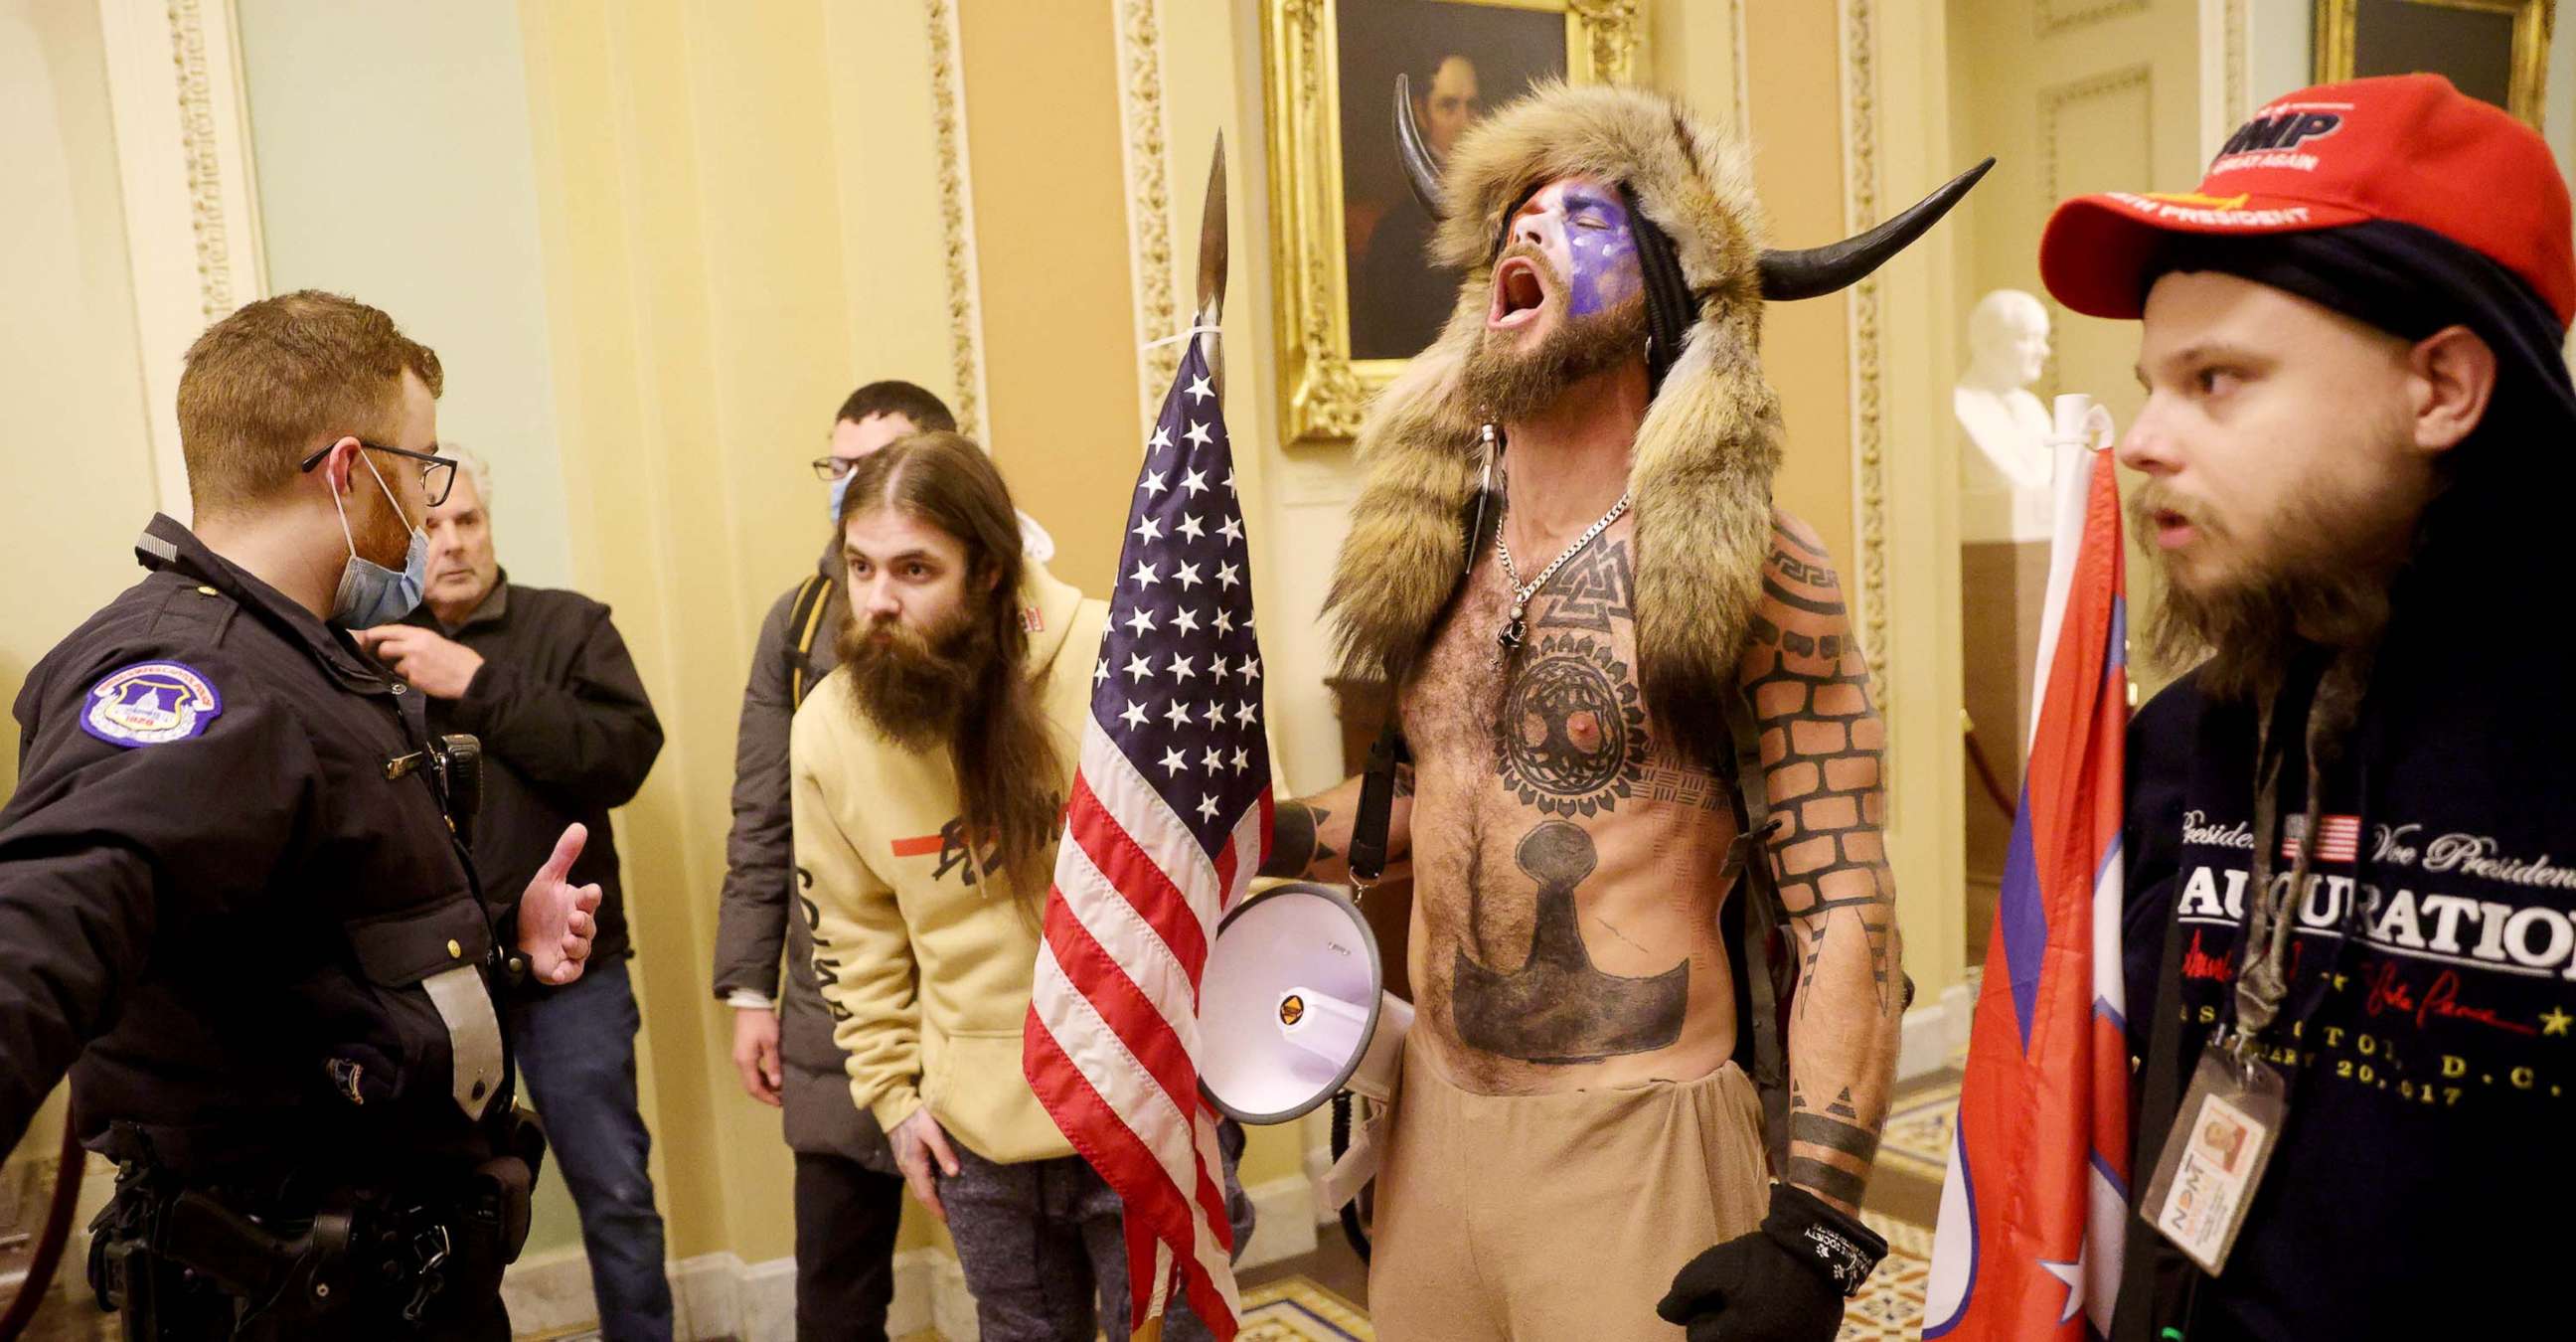 PHOTO: Protesters, including Jacob Anthony Chansley, a.k.a. Jake Angeli, of Arizona, confront Capitol Police after penetrating security at the U.S. Capitol Building on Jan. 06, 2021. 